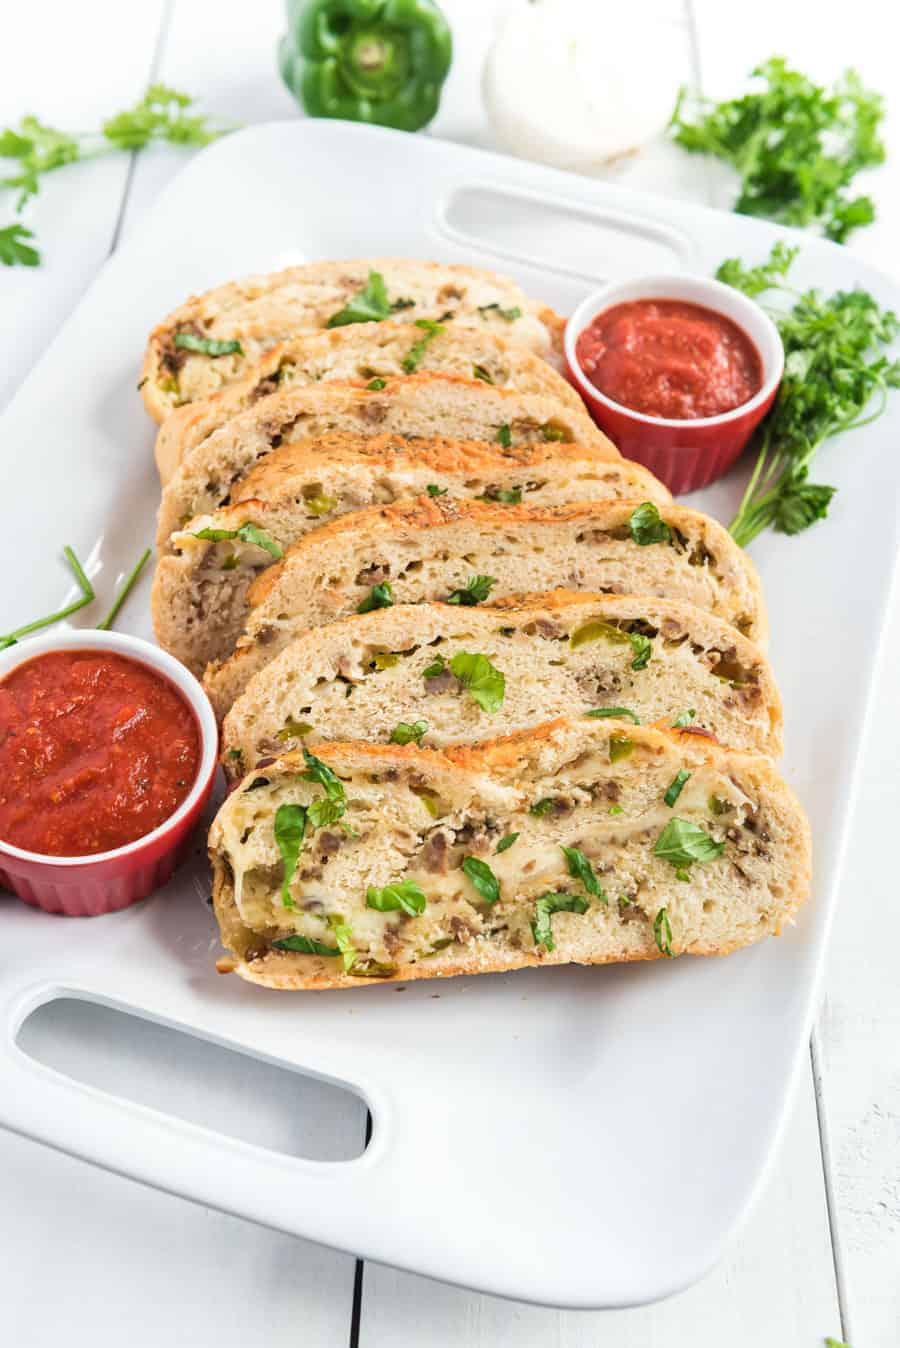 Cheesy Sausage and Pepper Stromboli made with homemade pizza crust, lots of sausage and cheese, and all rolled up into dippable pizza-like slices the whole family will love.